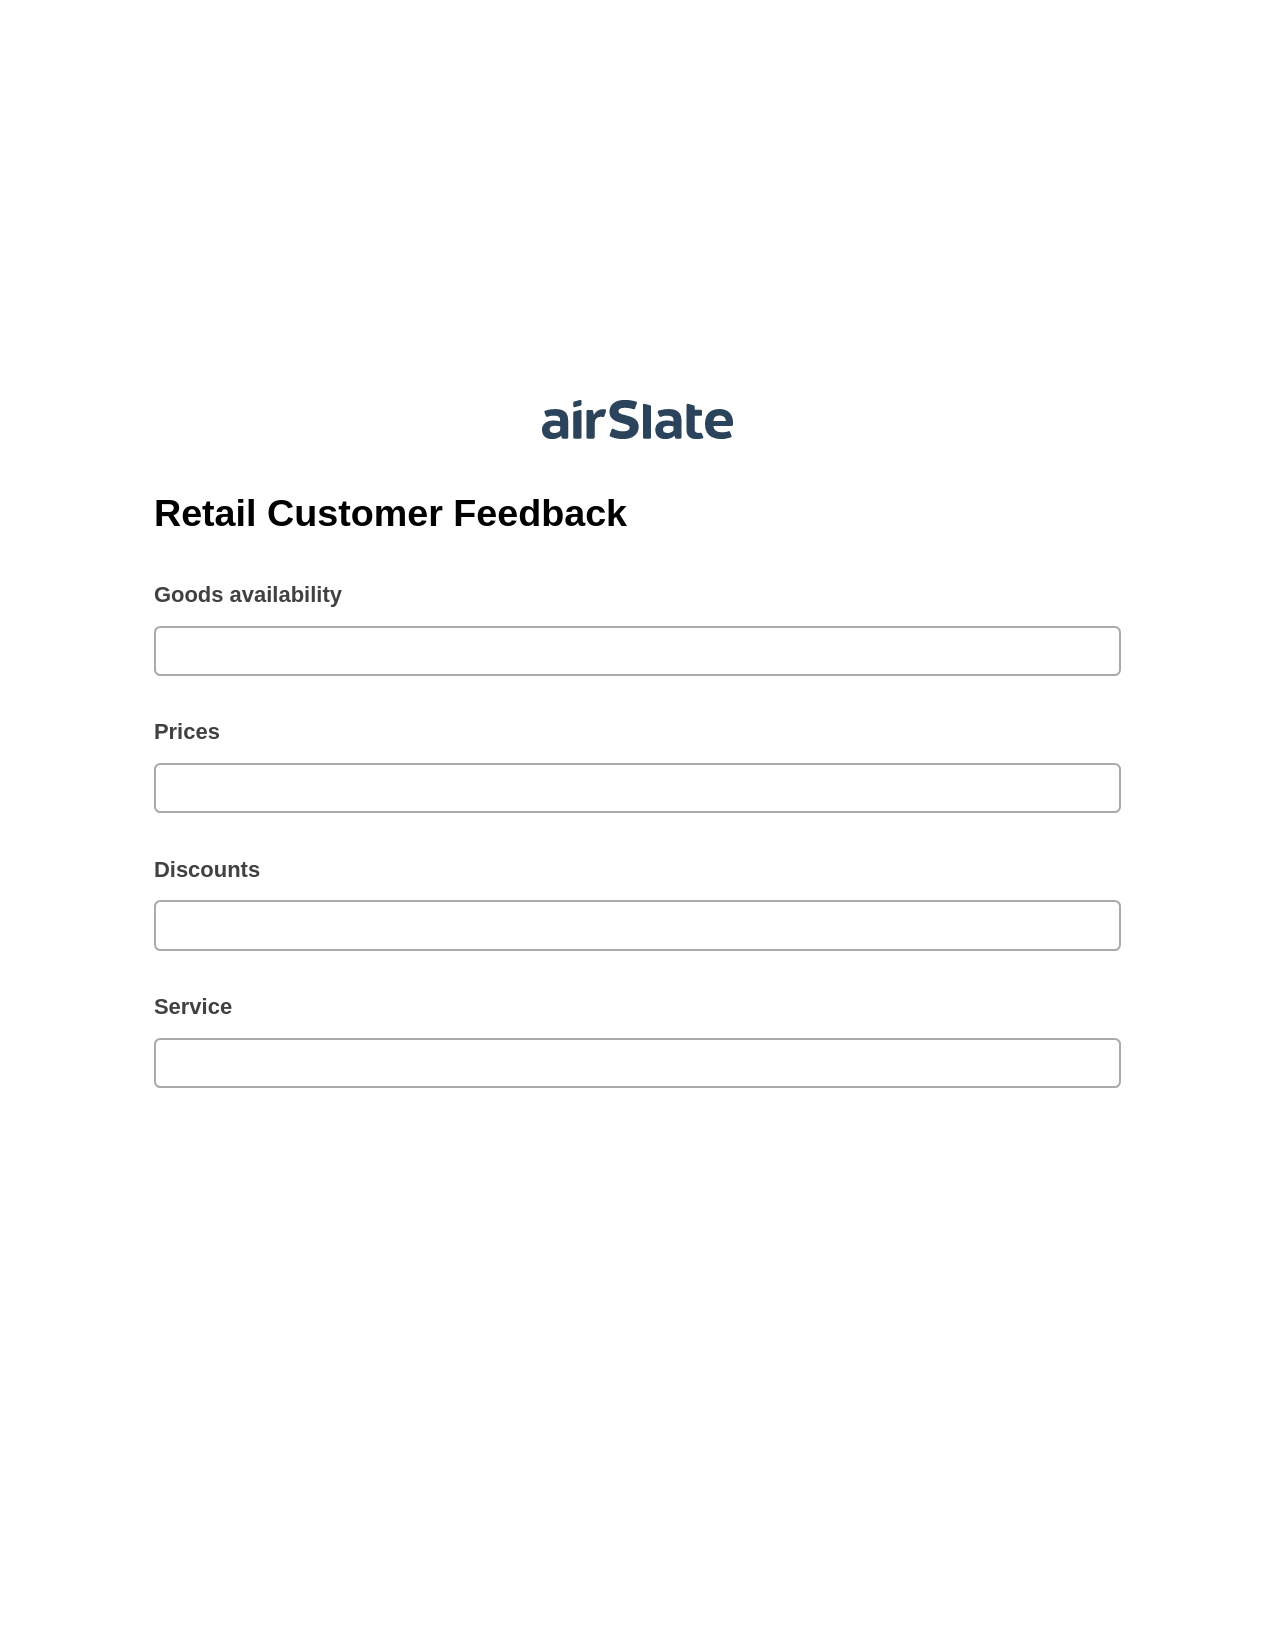 Retail Customer Feedback Pre-fill Slate from MS Dynamics 365 Records Bot, Email Notification Bot, Box Bot